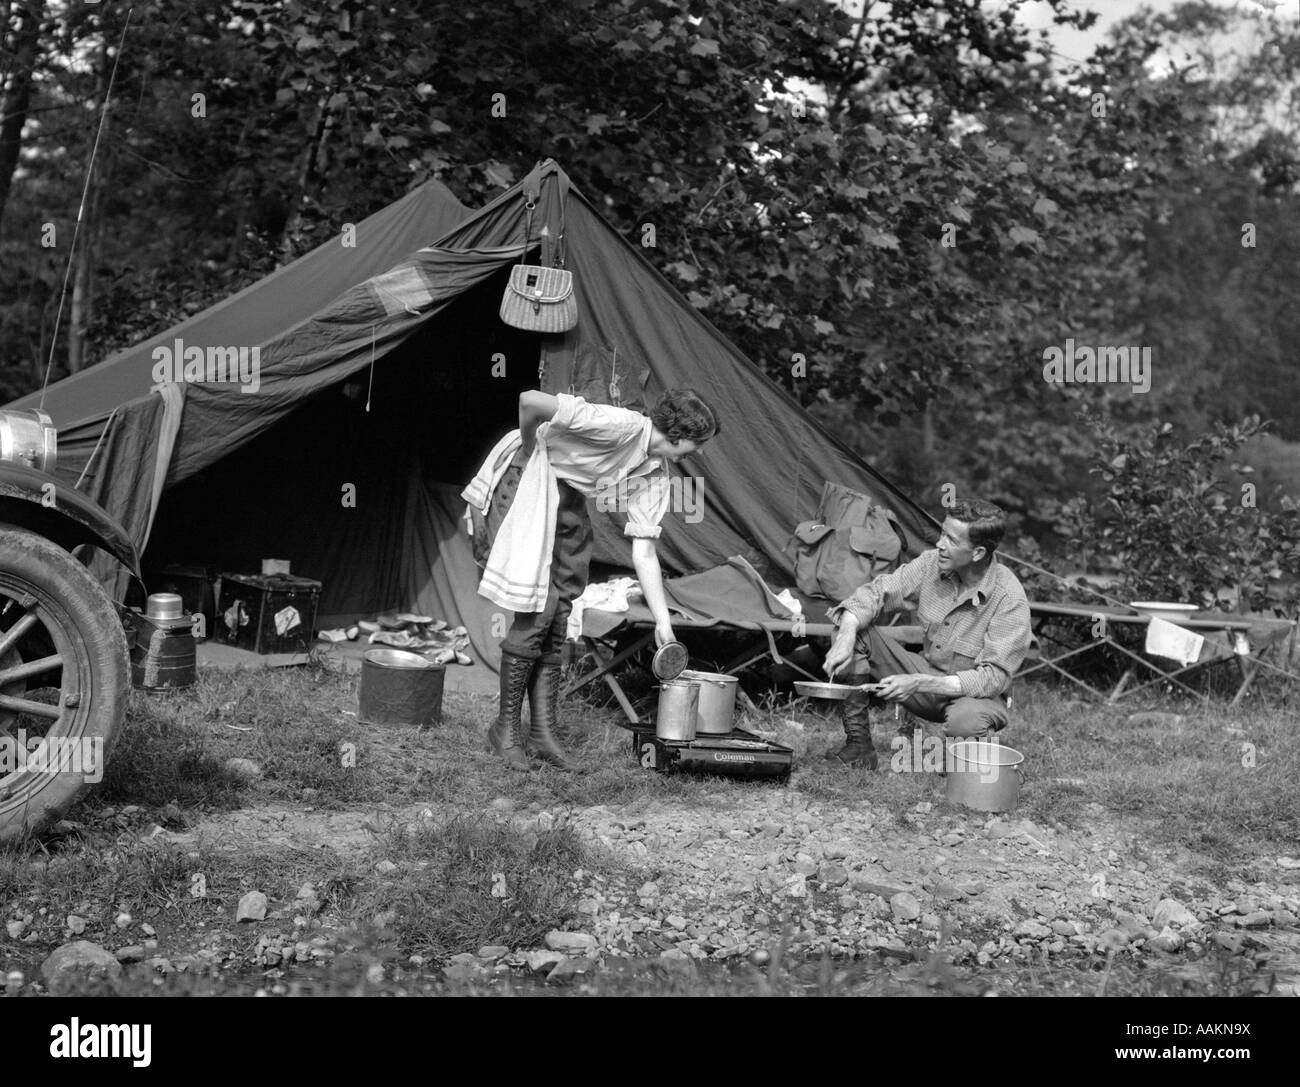 1920s COUPLE MAN WOMAN ON FISHING CAMPING TRIP VACATION AT CAMPSITE MAN COOKING OVER FIRE Stock Photo